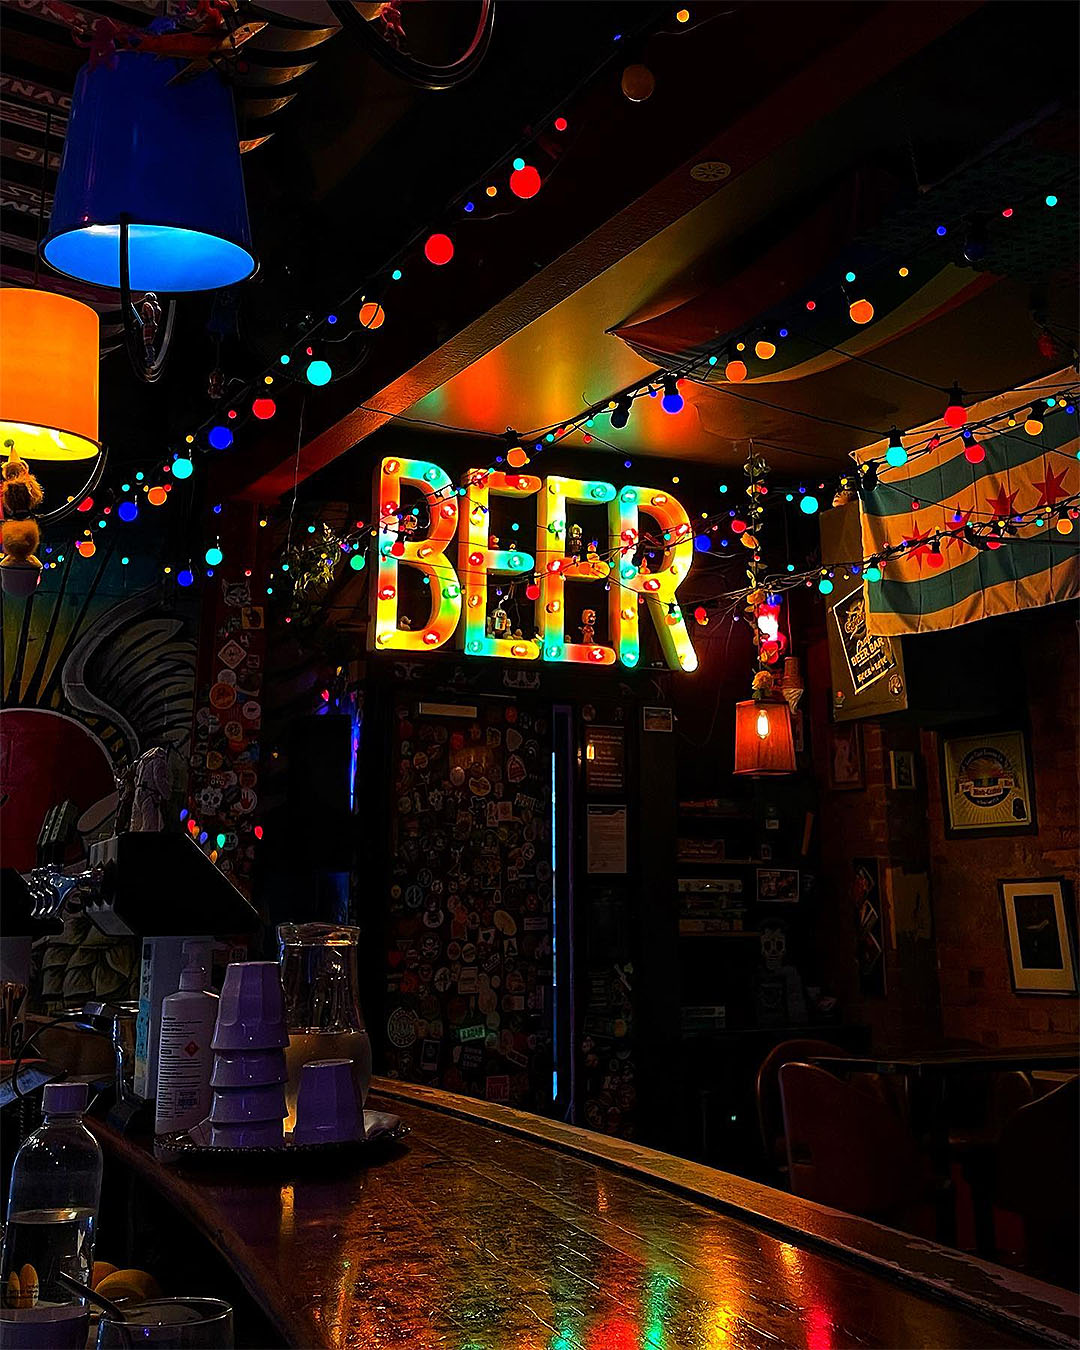 Inside Golding's Free Dive shows a sign illuminated that reads BEER.